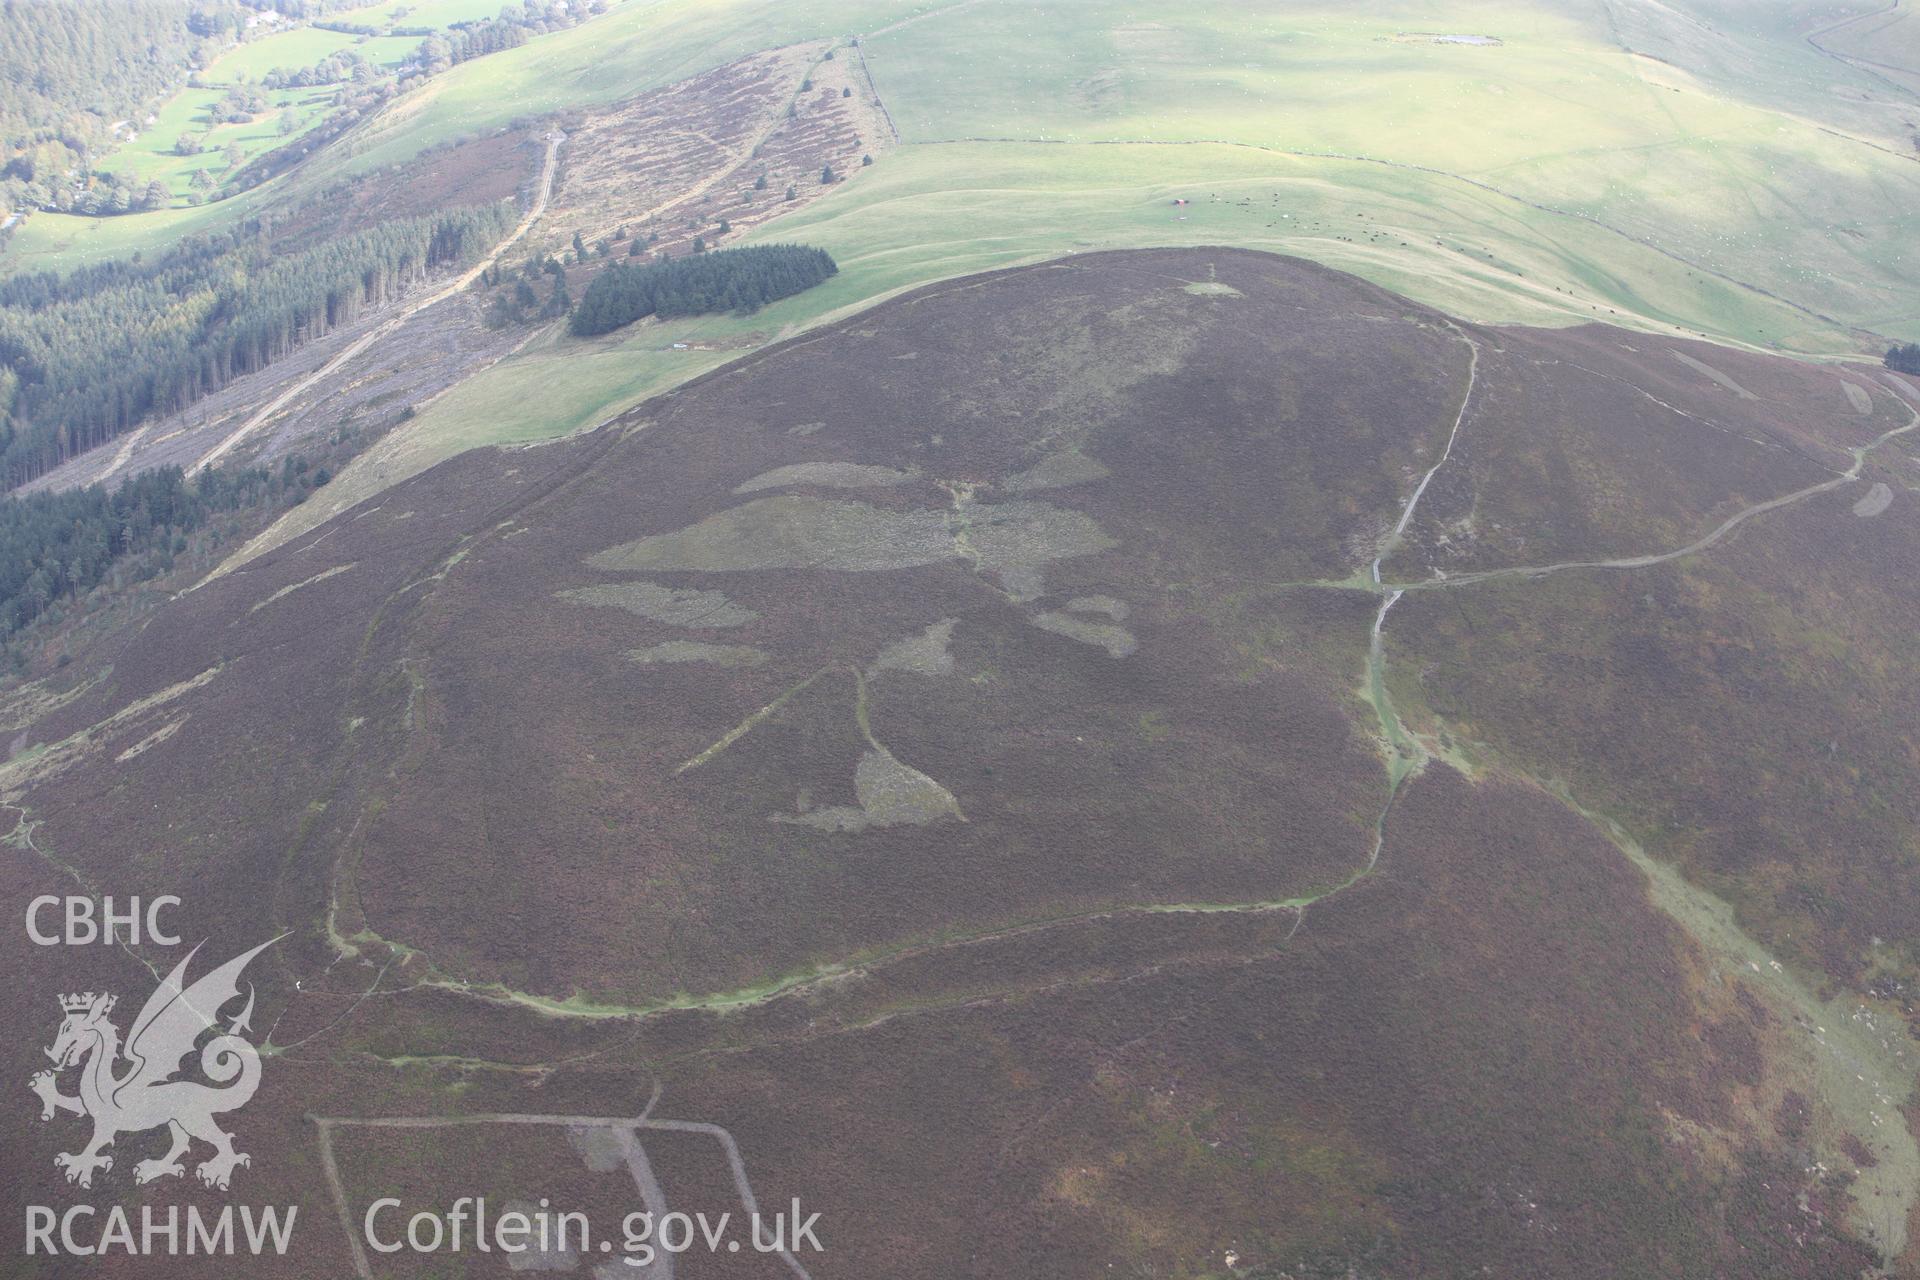 RCAHMW colour oblique photograph of Foel Fenlli Hillfort. Taken by Toby Driver on 04/10/2011.